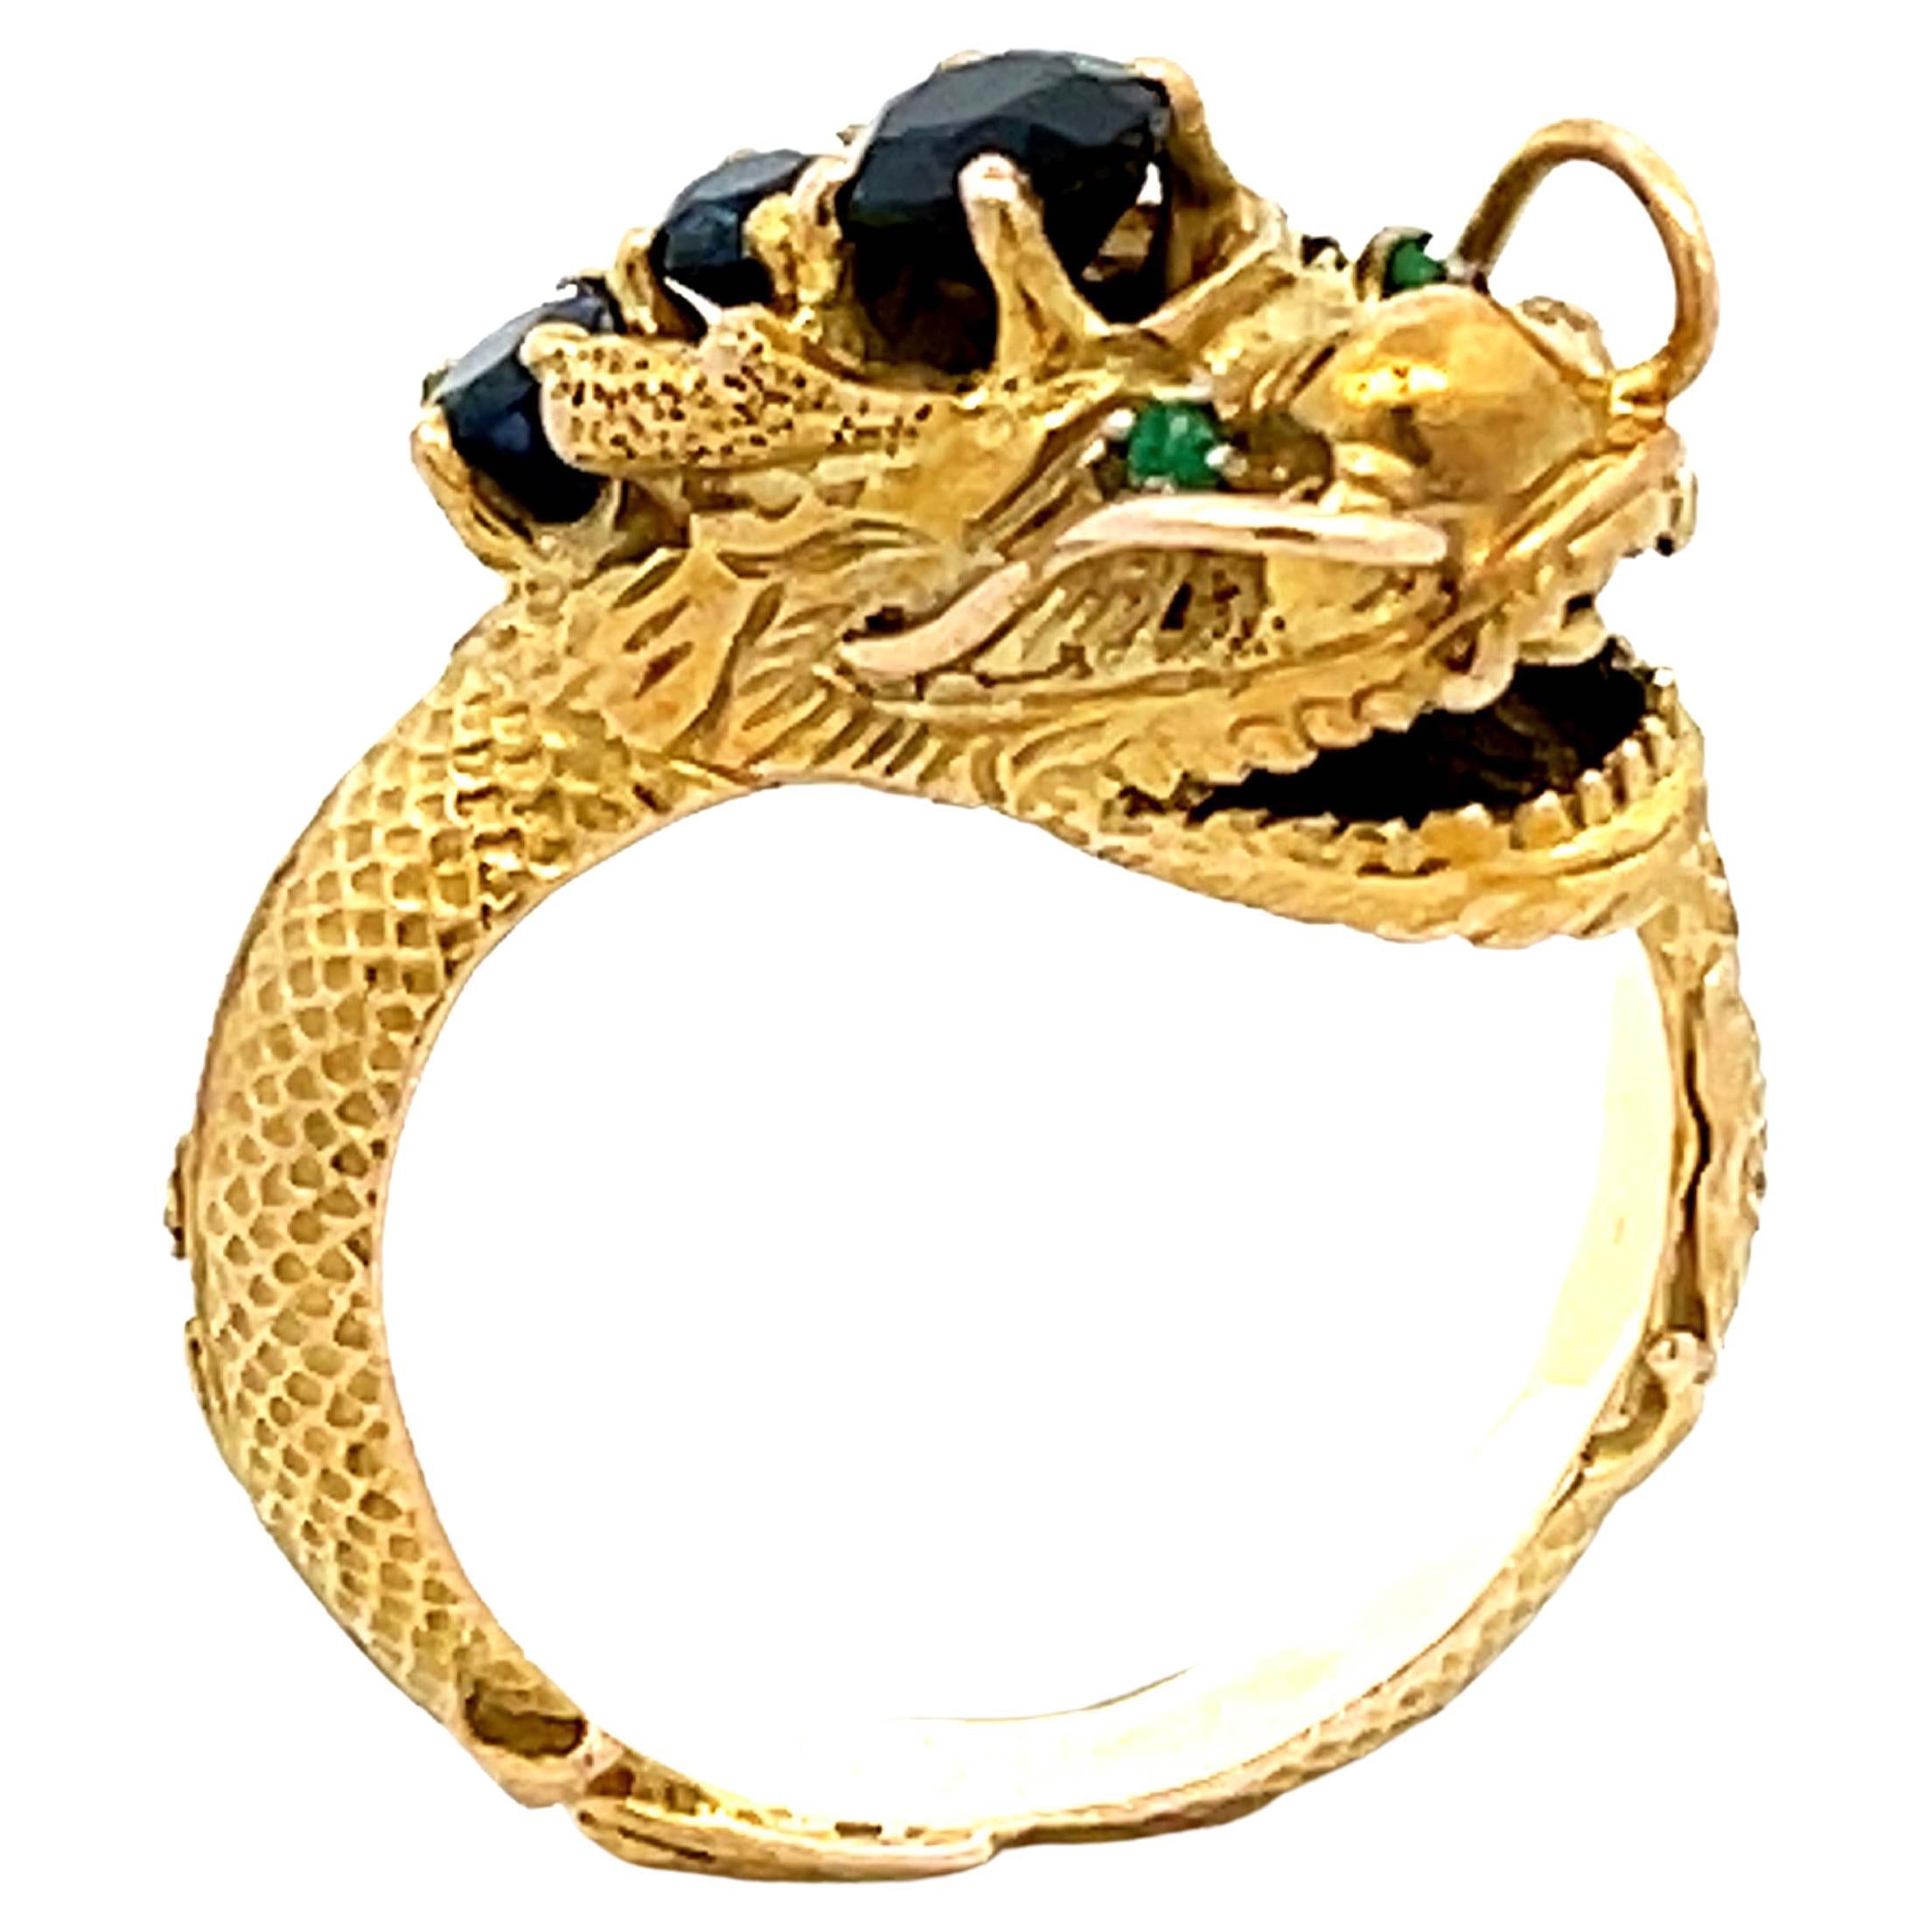 Chinese Dragon Wraparound Ring with Sapphires & Emerald Eyes in 14k Yellow Gold For Sale